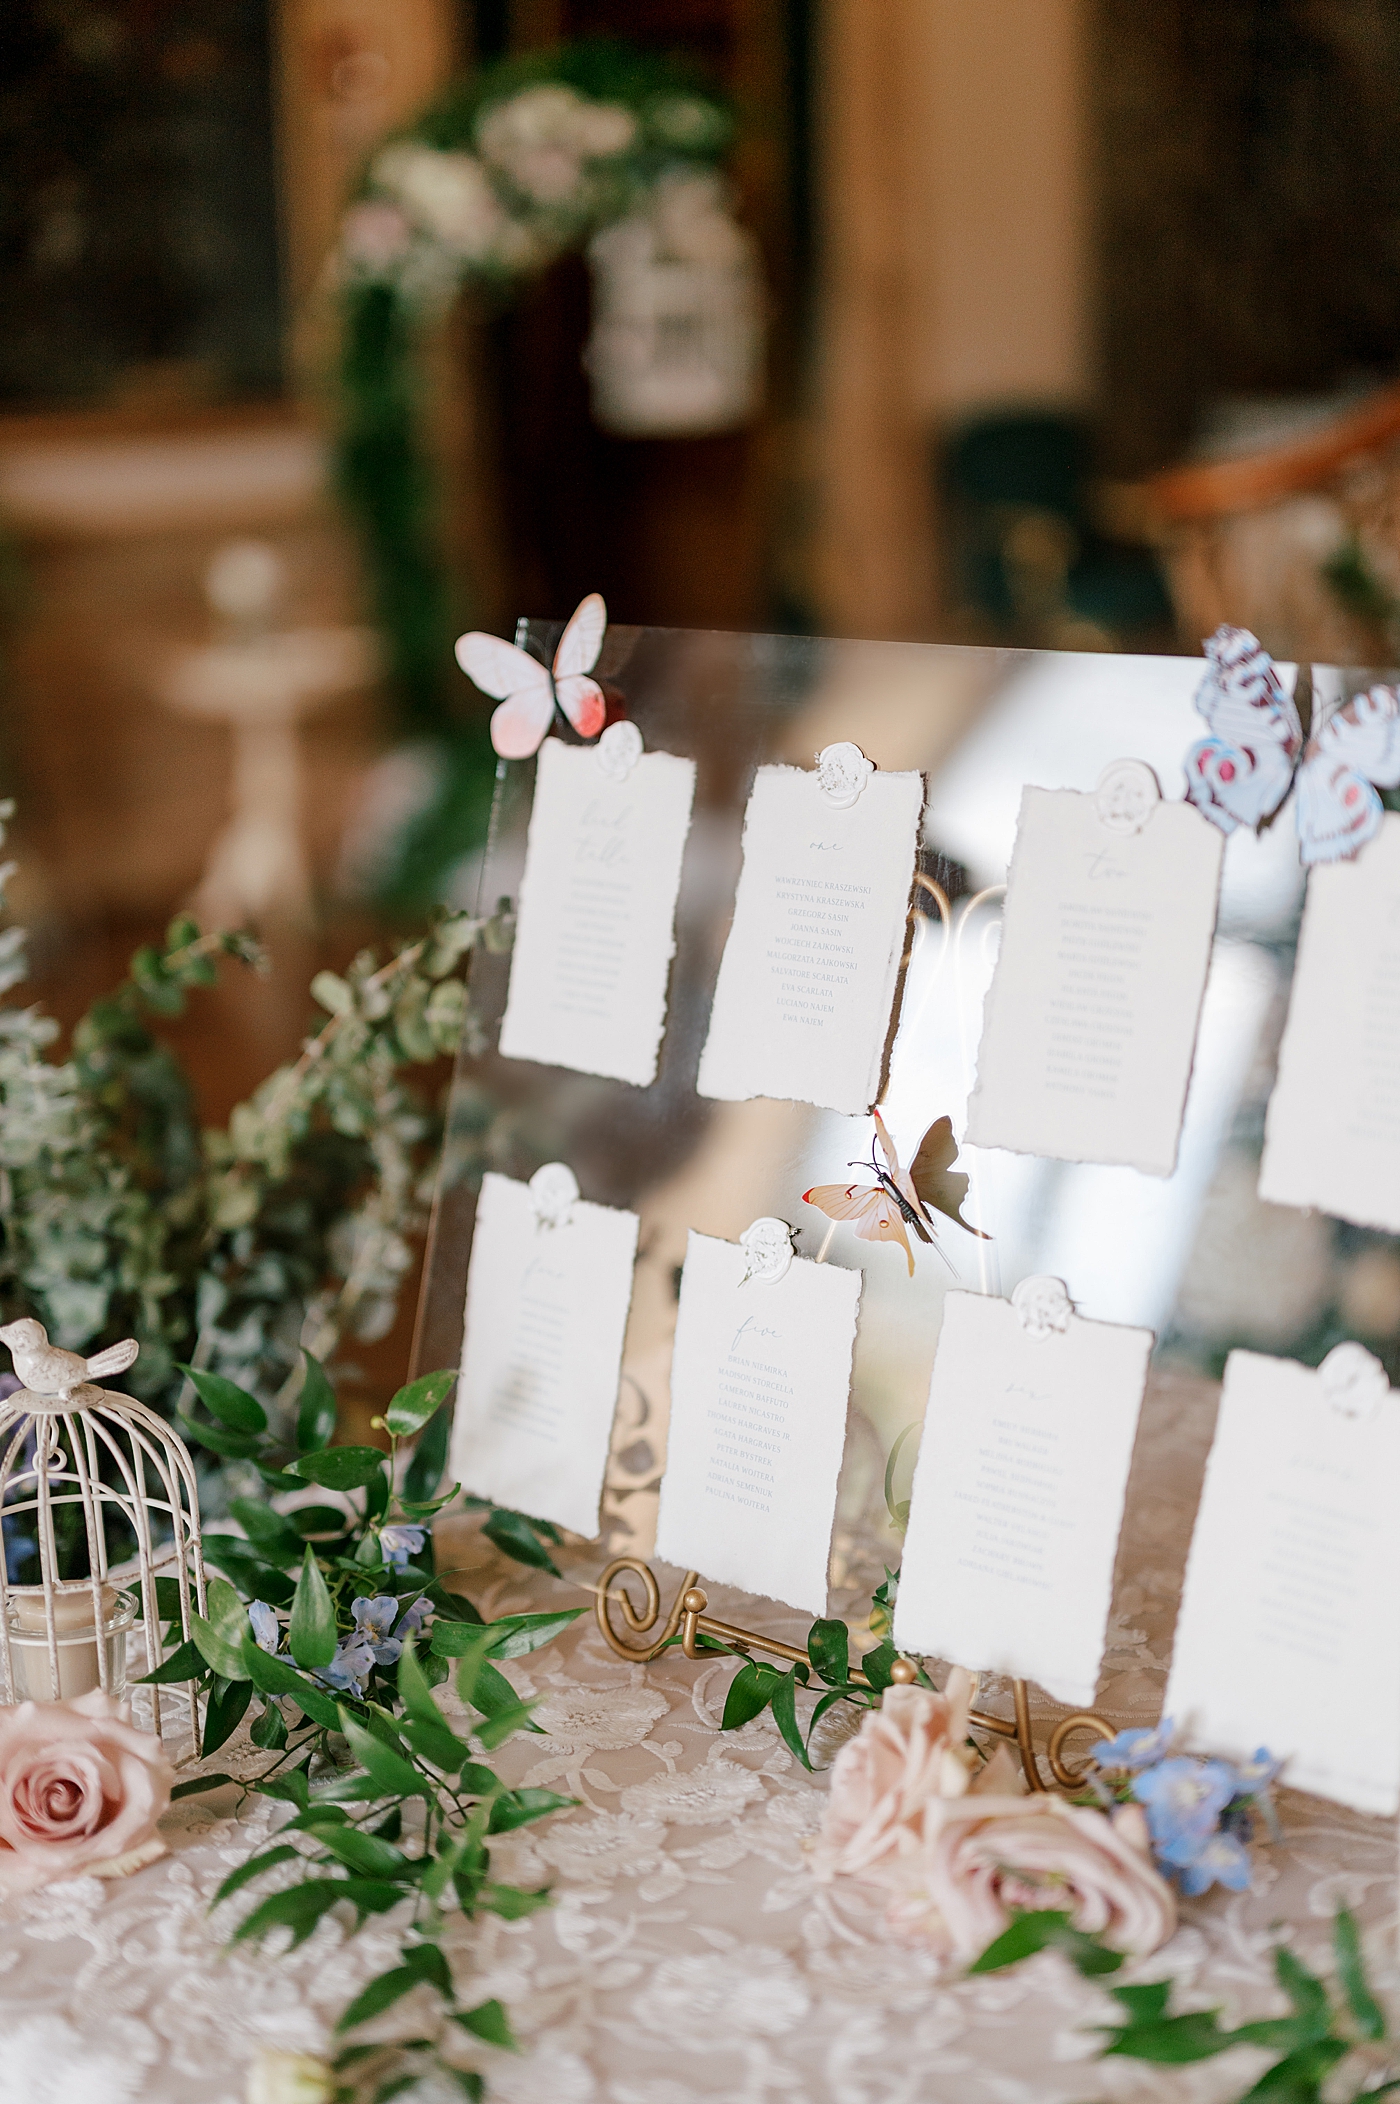 Guests seating chart with butterflies and flowers | Image by Hope Helmuth Photography